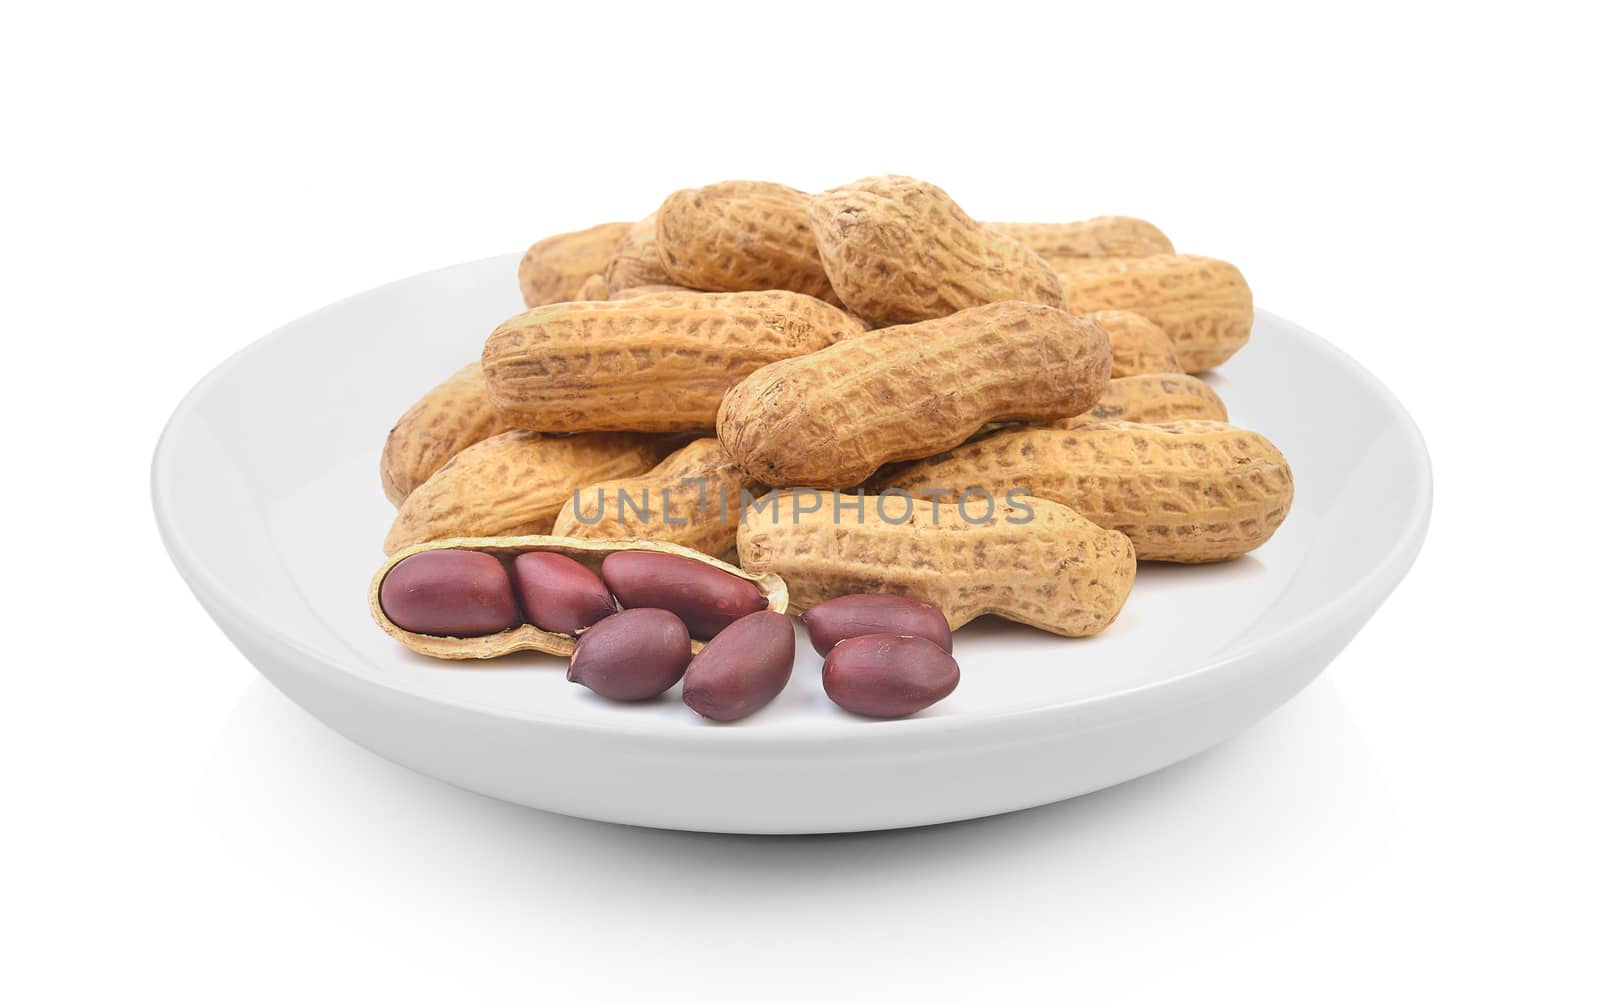 peanuts in plate on white background